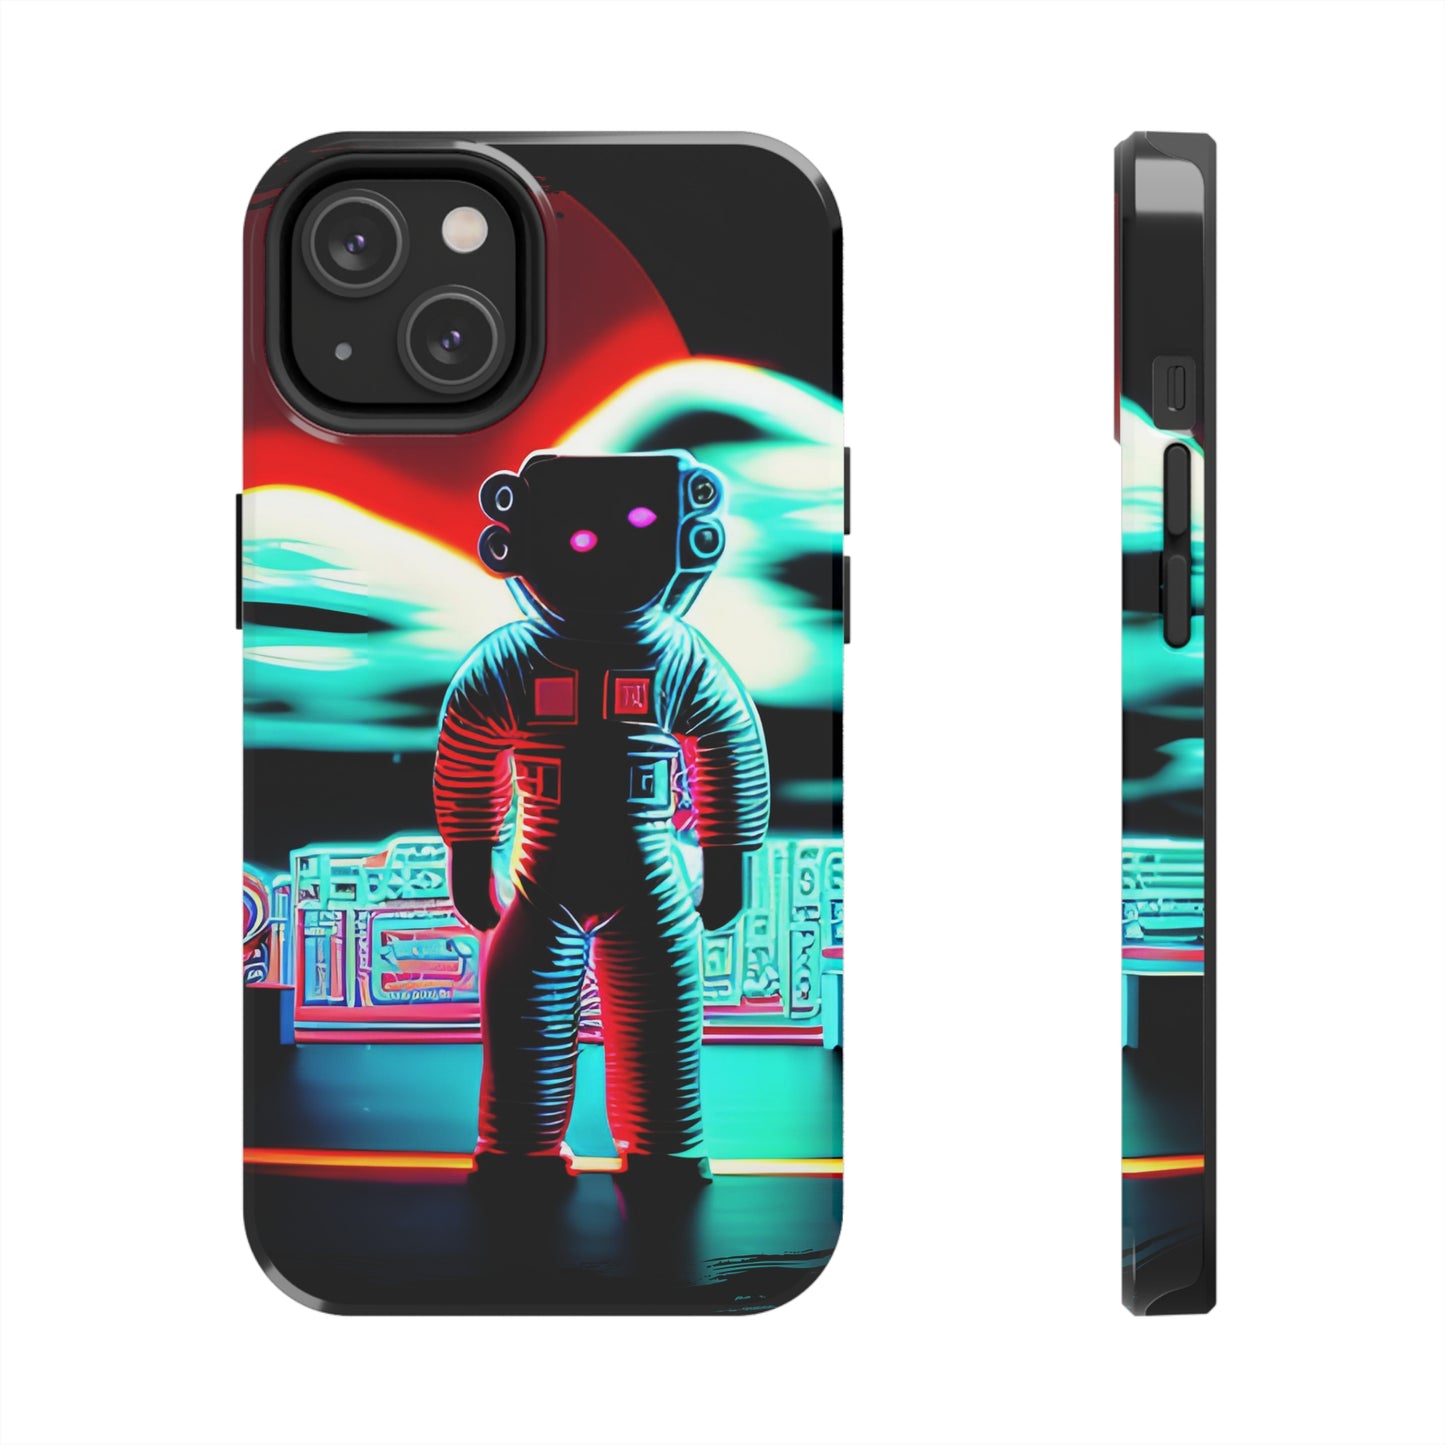 The Intergalactic Voyager: Retro Alien Astronaut iPhone Case - Sky High West Chester